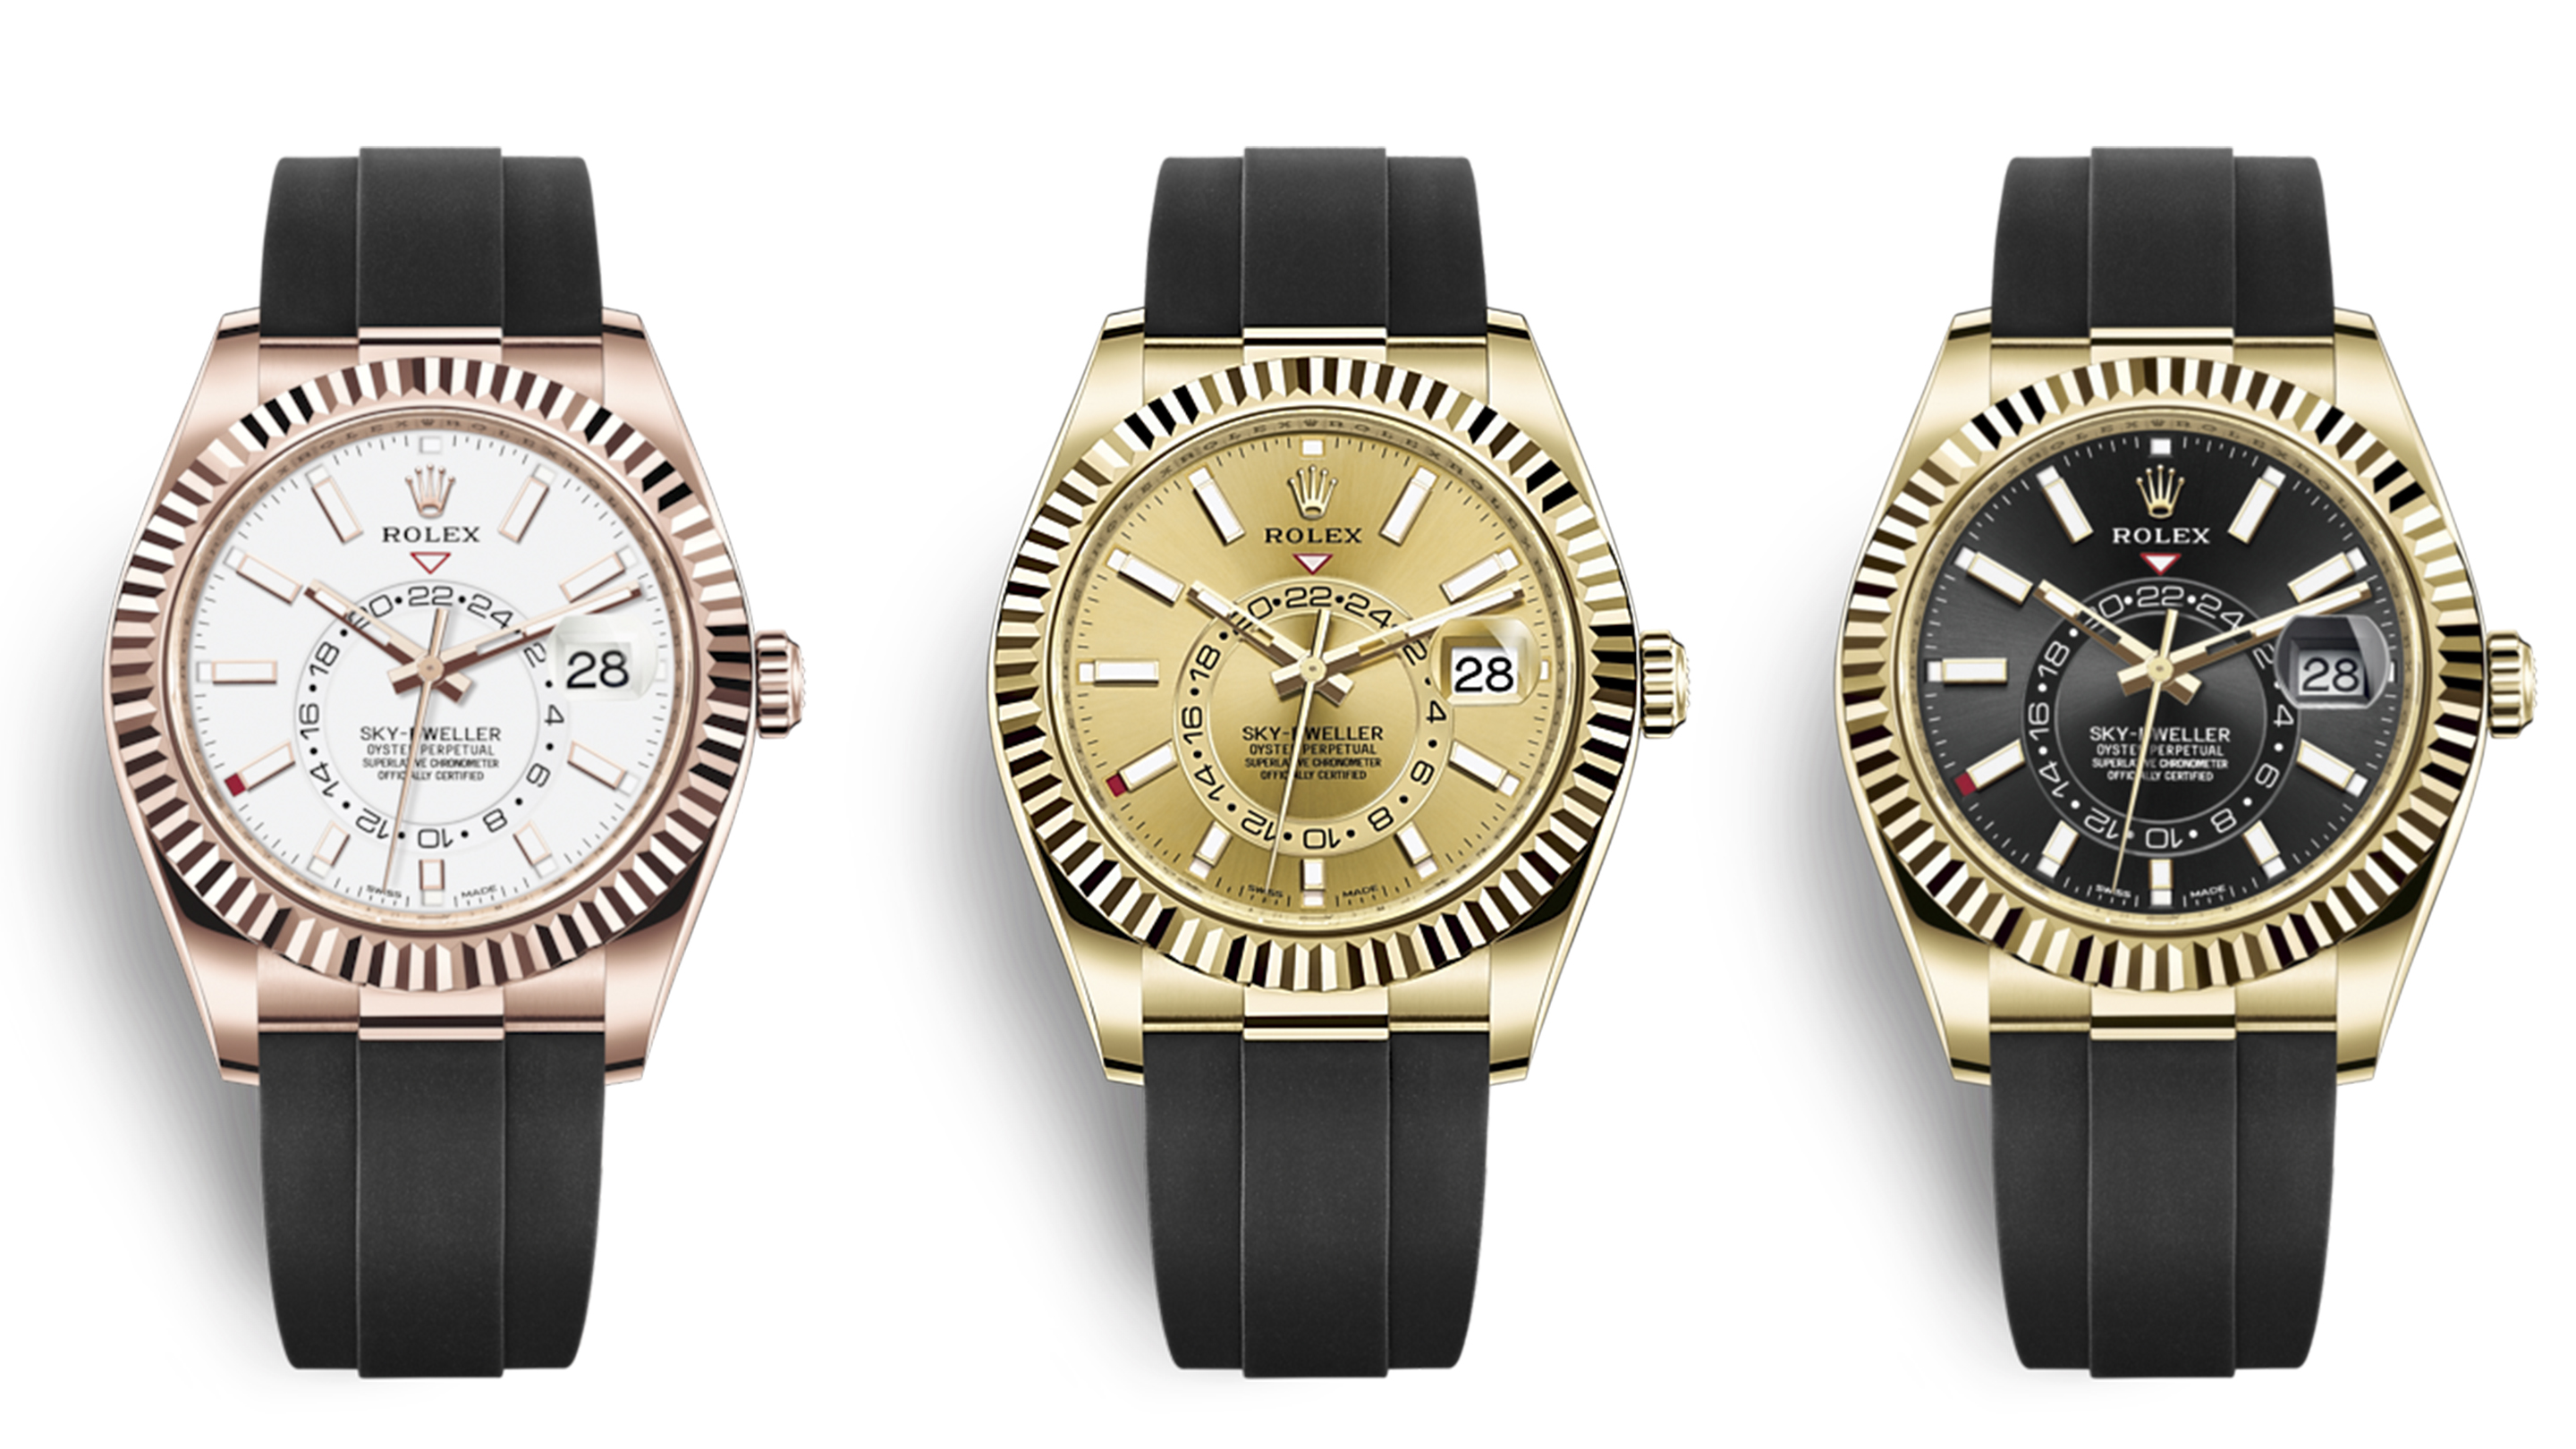 Introducing: The New Rolex Sky-Dweller 